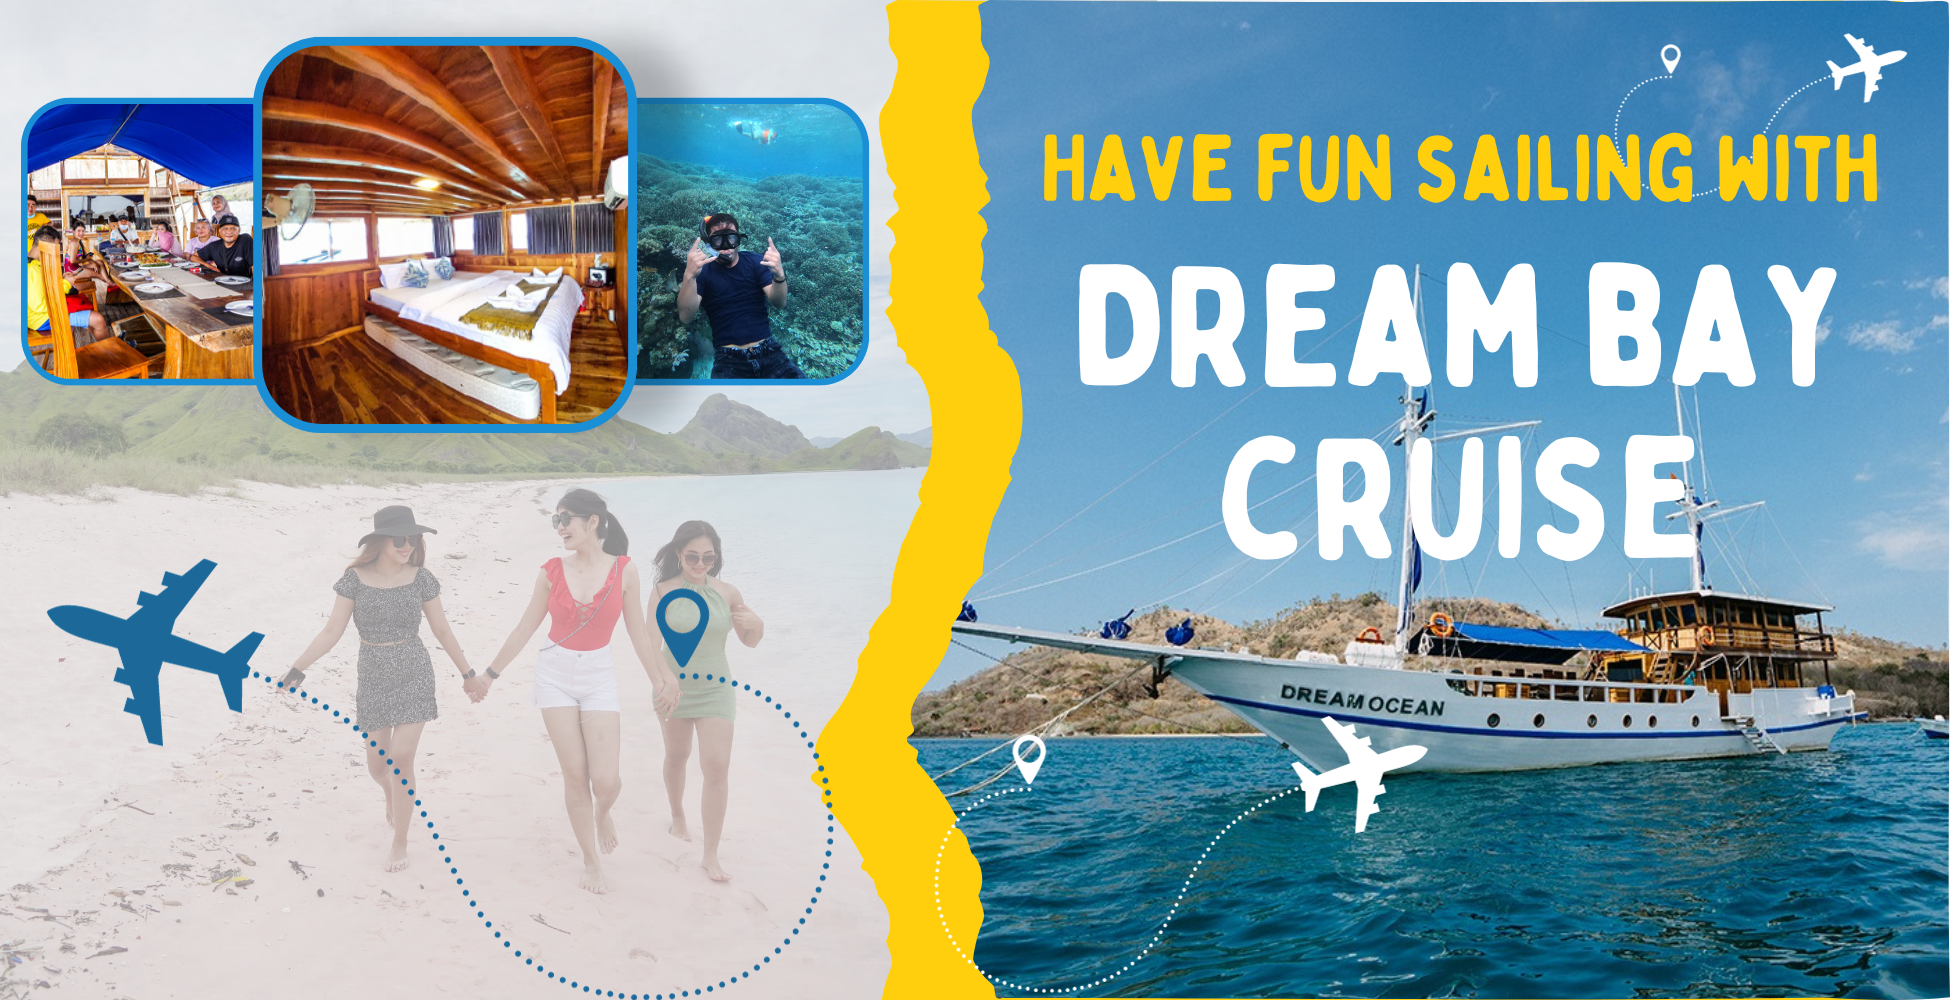 Enjoy A Fun Cruise With Family And Loved Ones